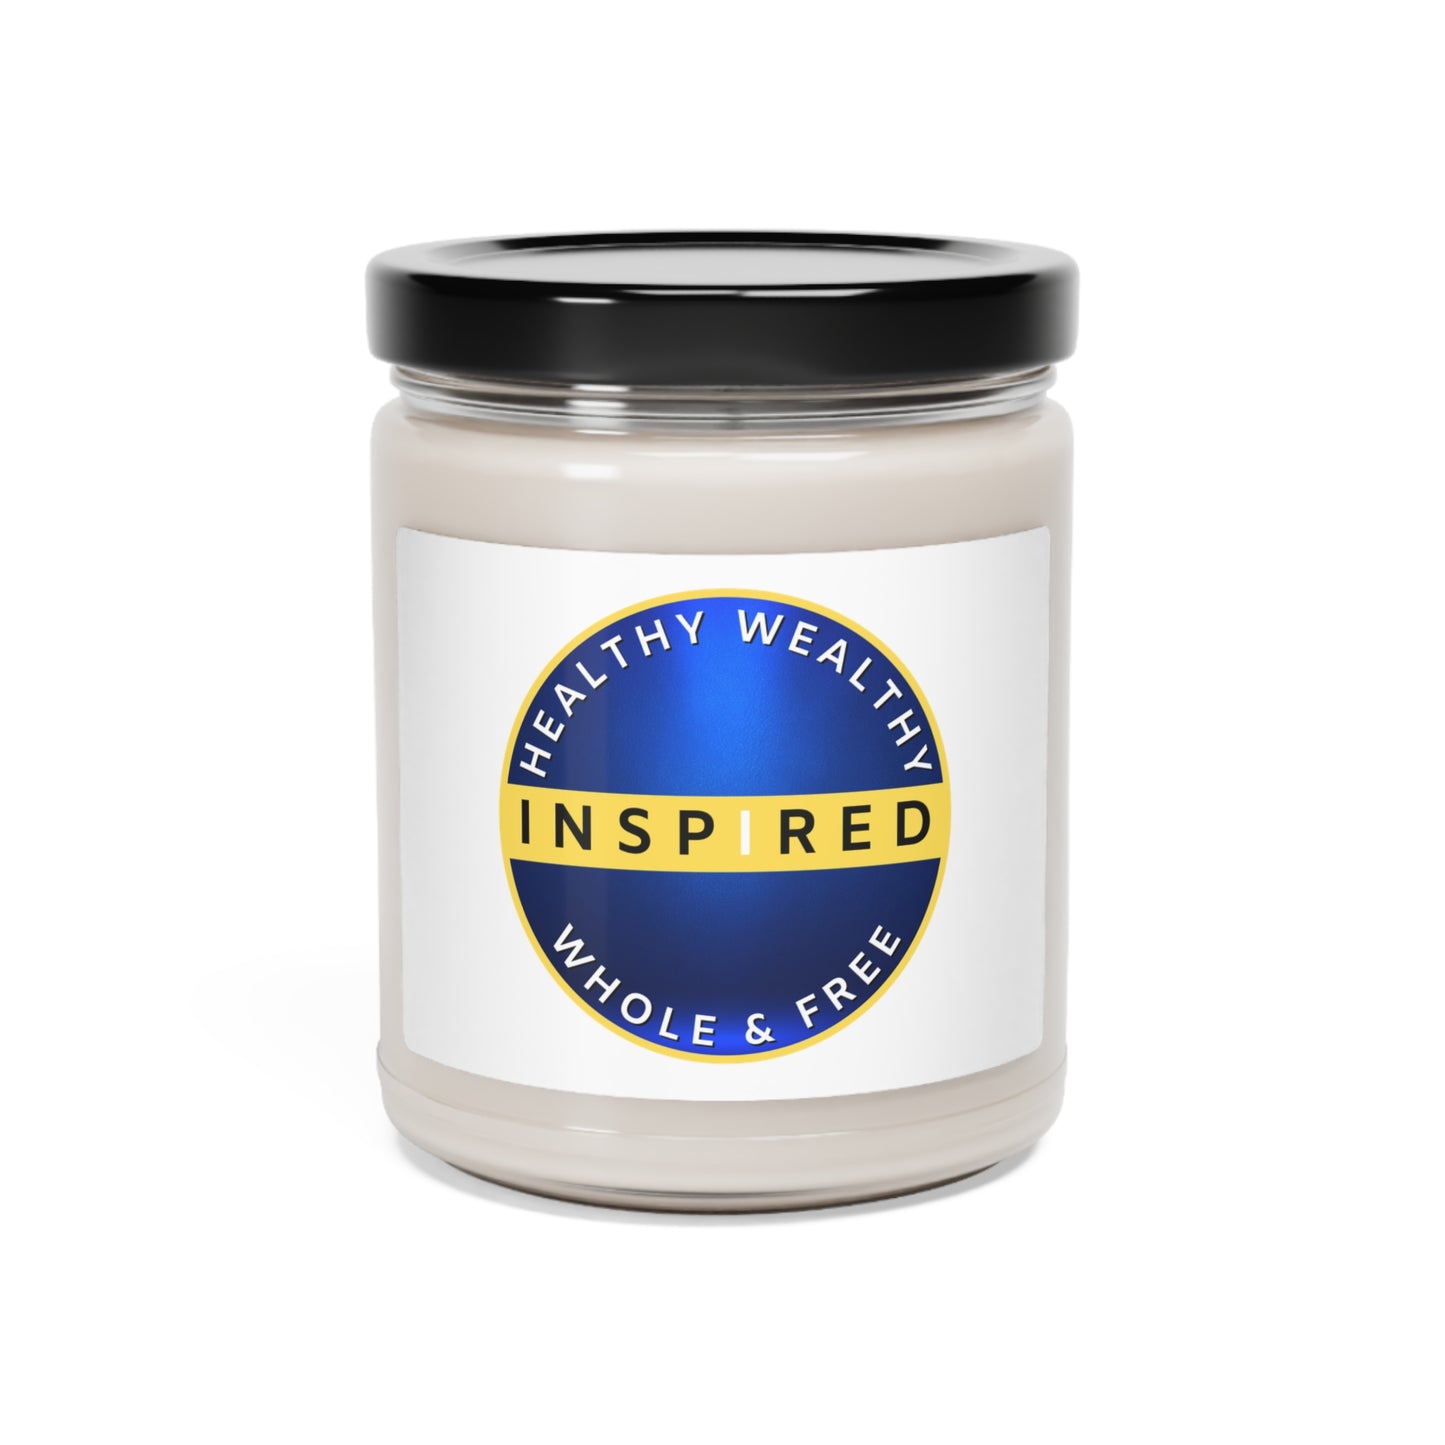 INSPIRED HWWF Scented Soy Candle, 9oz